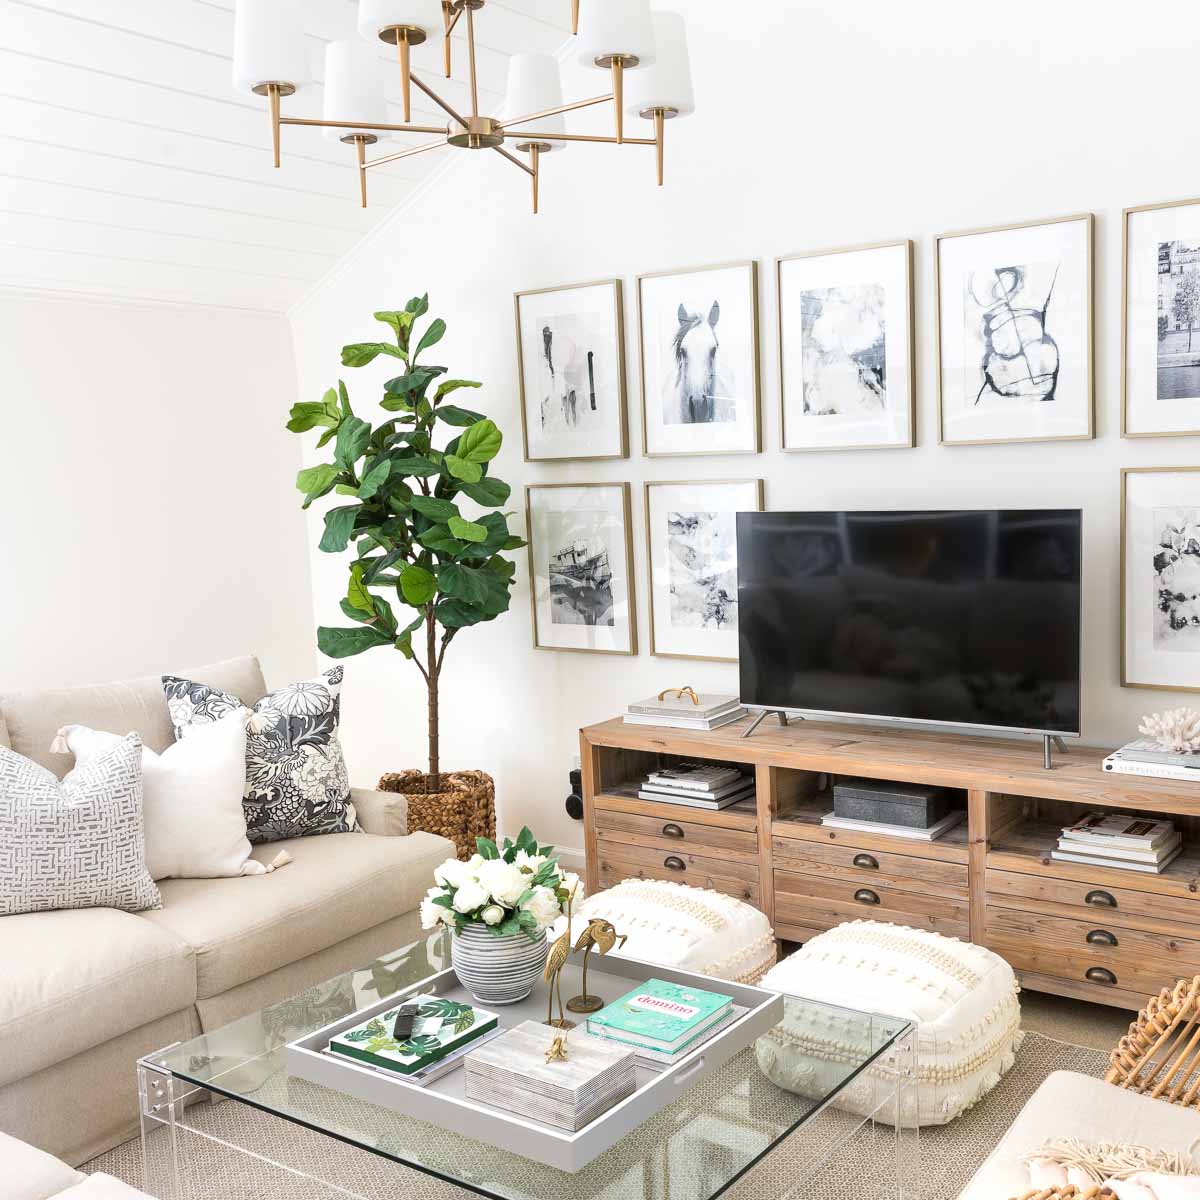 10 Go-To Living Room Corner Ideas! - Driven by Decor